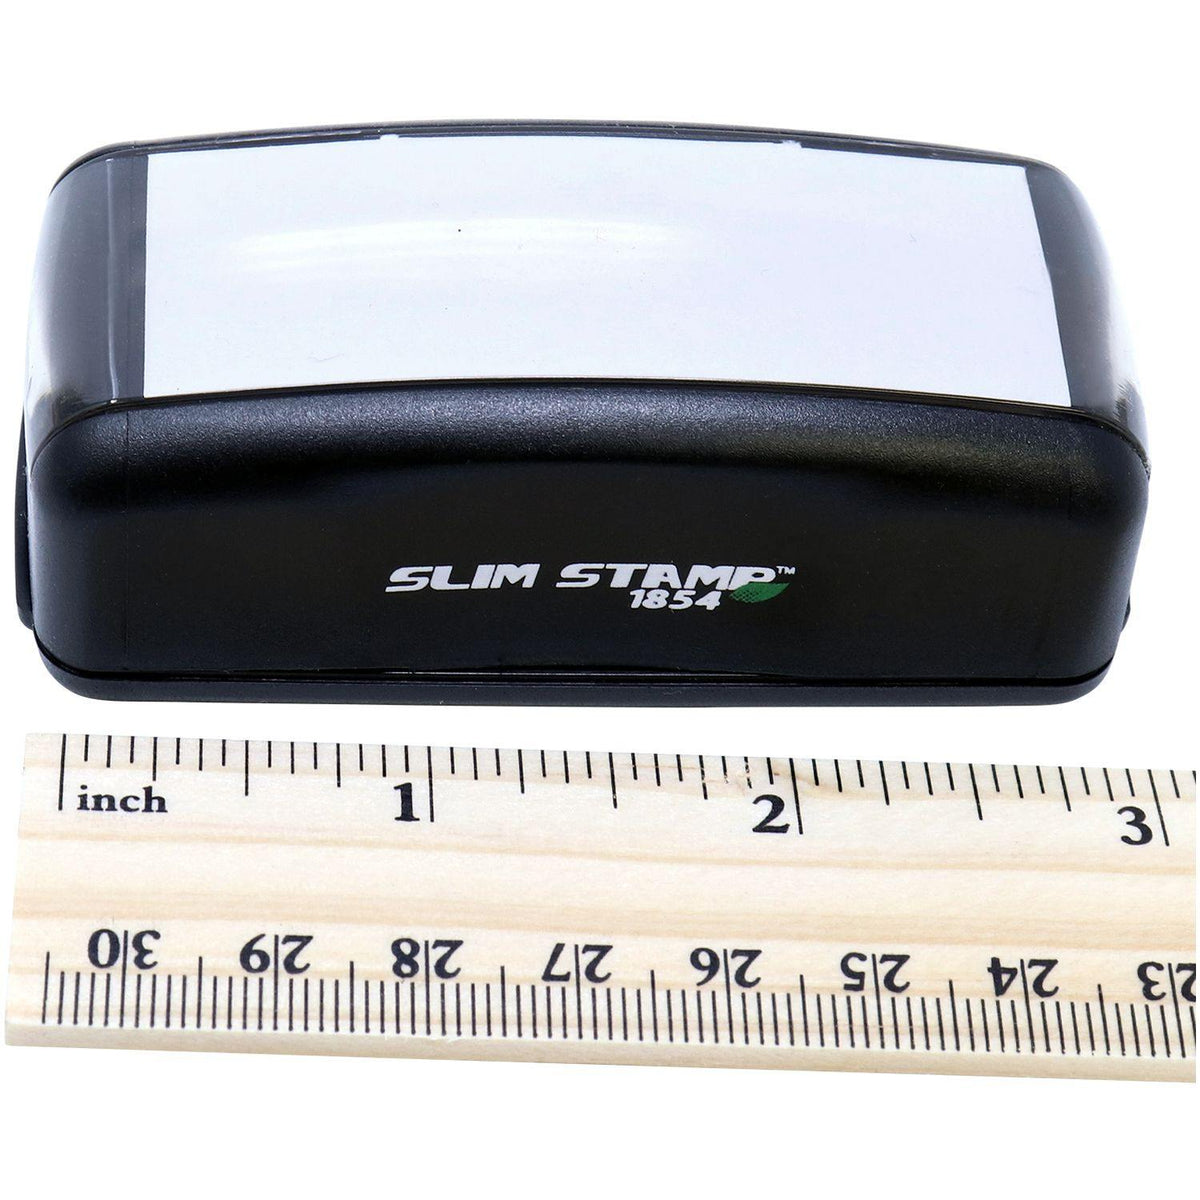 Measurement Large Pre Inked Notarize Stamp with Ruler